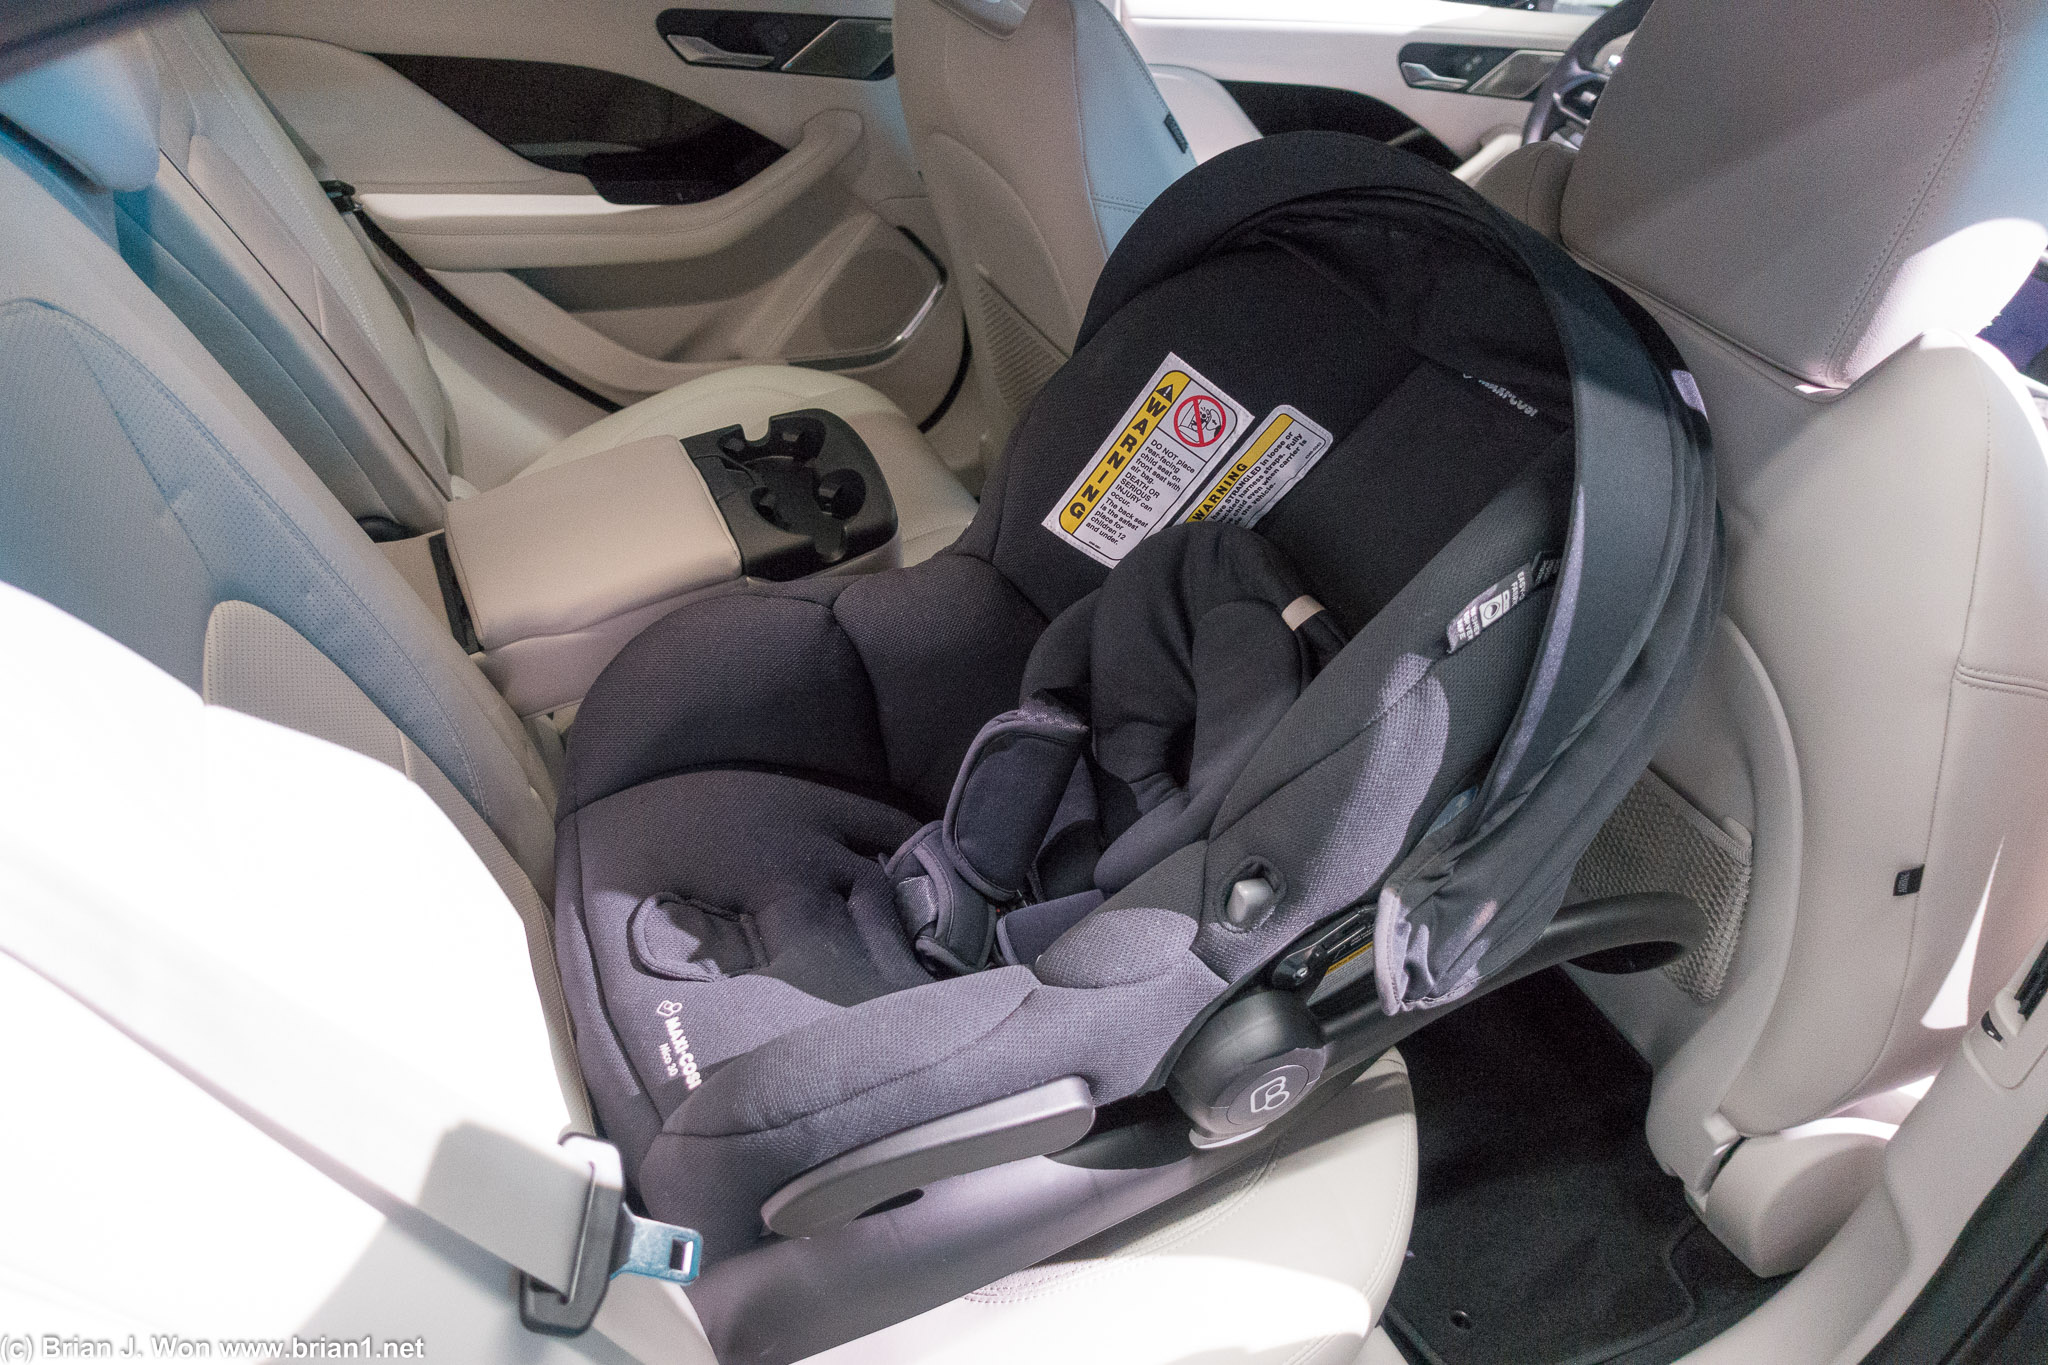 A baby seat is a tight fit in an I-Pace.